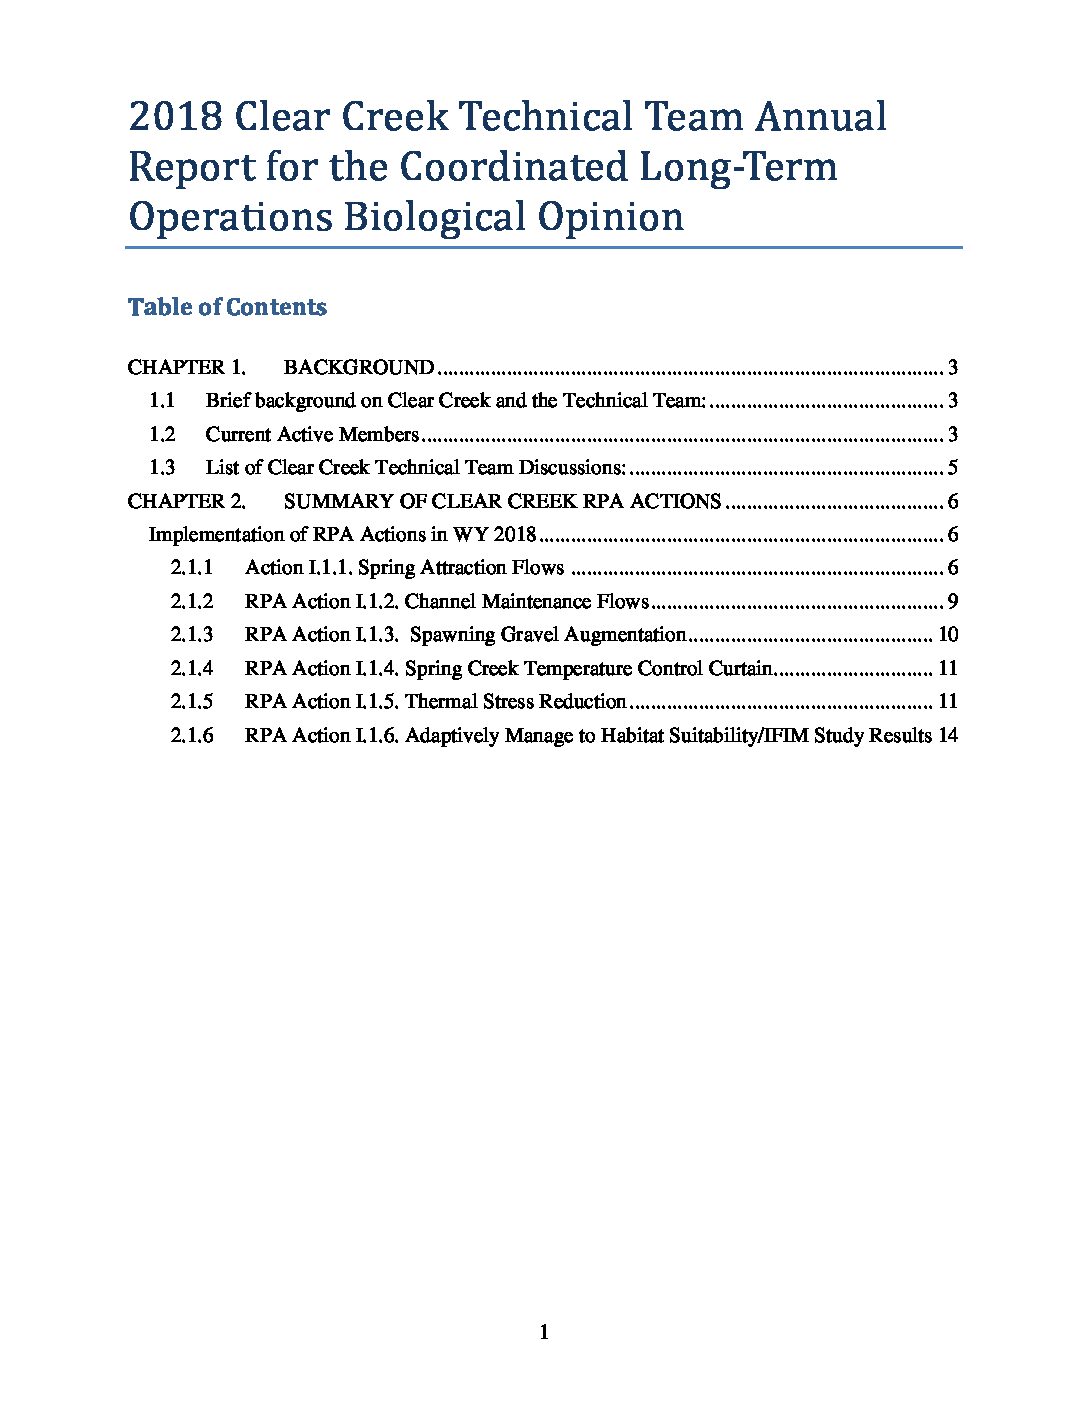 2018 Clear Creek Technical Team Annual Report for the Coordinated Long-Term Operations Biological Opinion